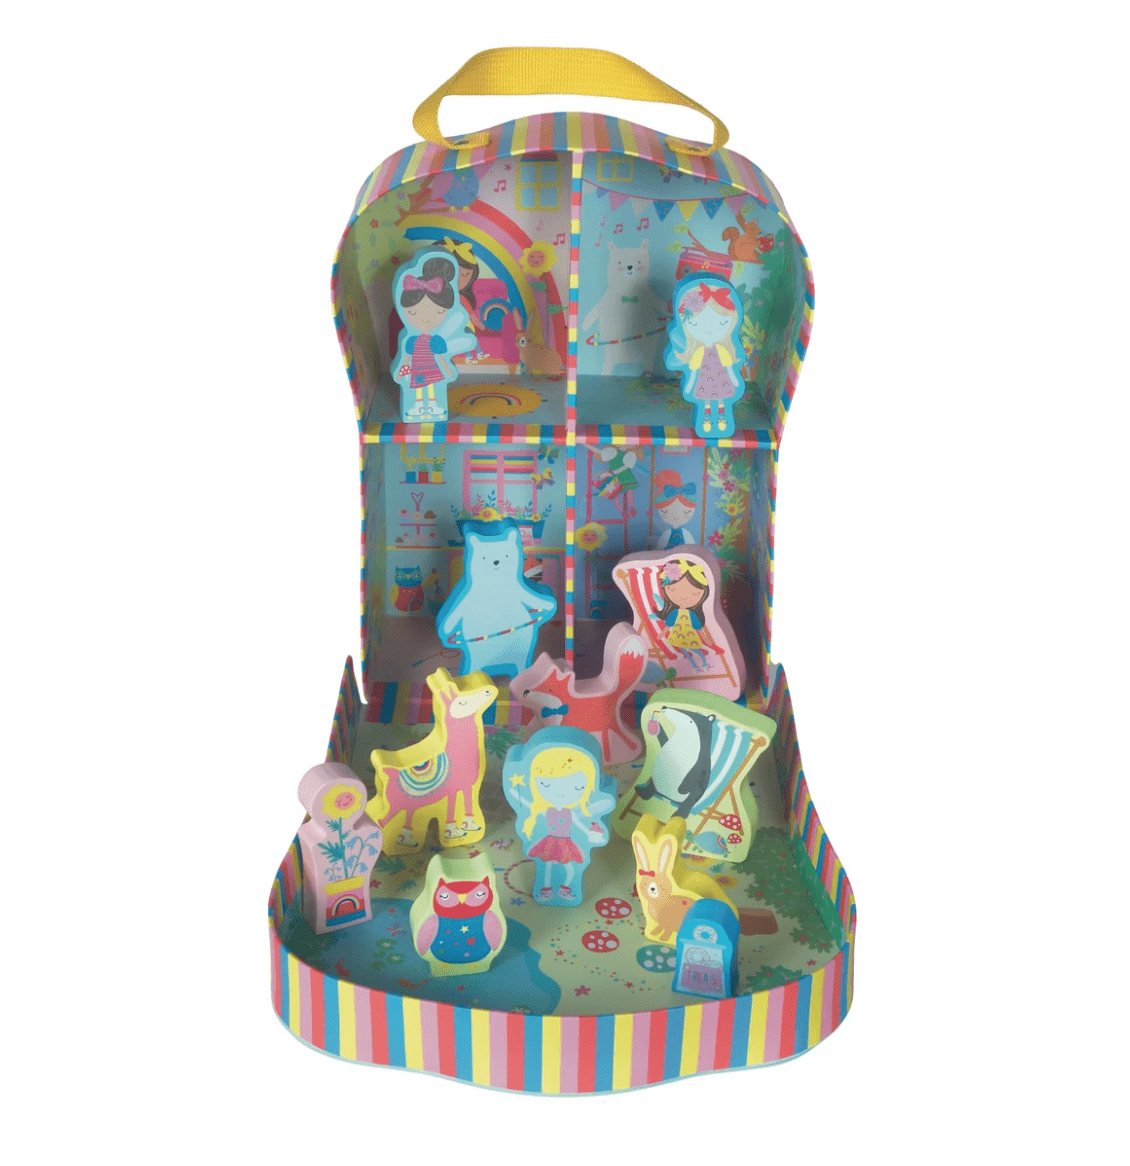 Playbox with Wooden Pieces - Rainbow Fairy - Twinkle Twinkle Little One